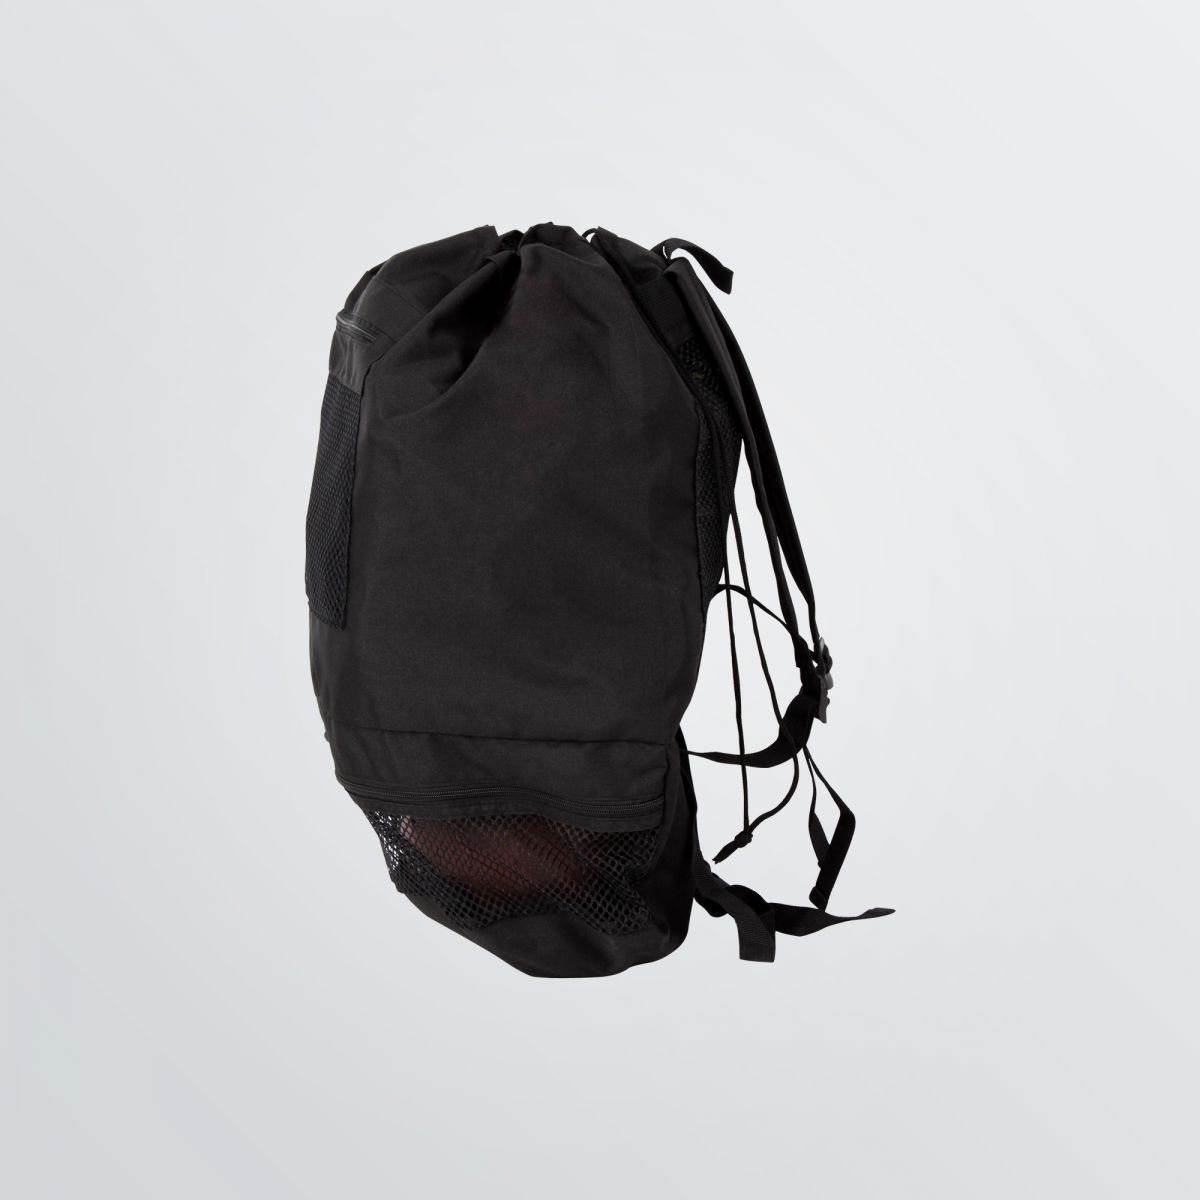 shooter ballbag black coloured with integrated ball compartment - side view